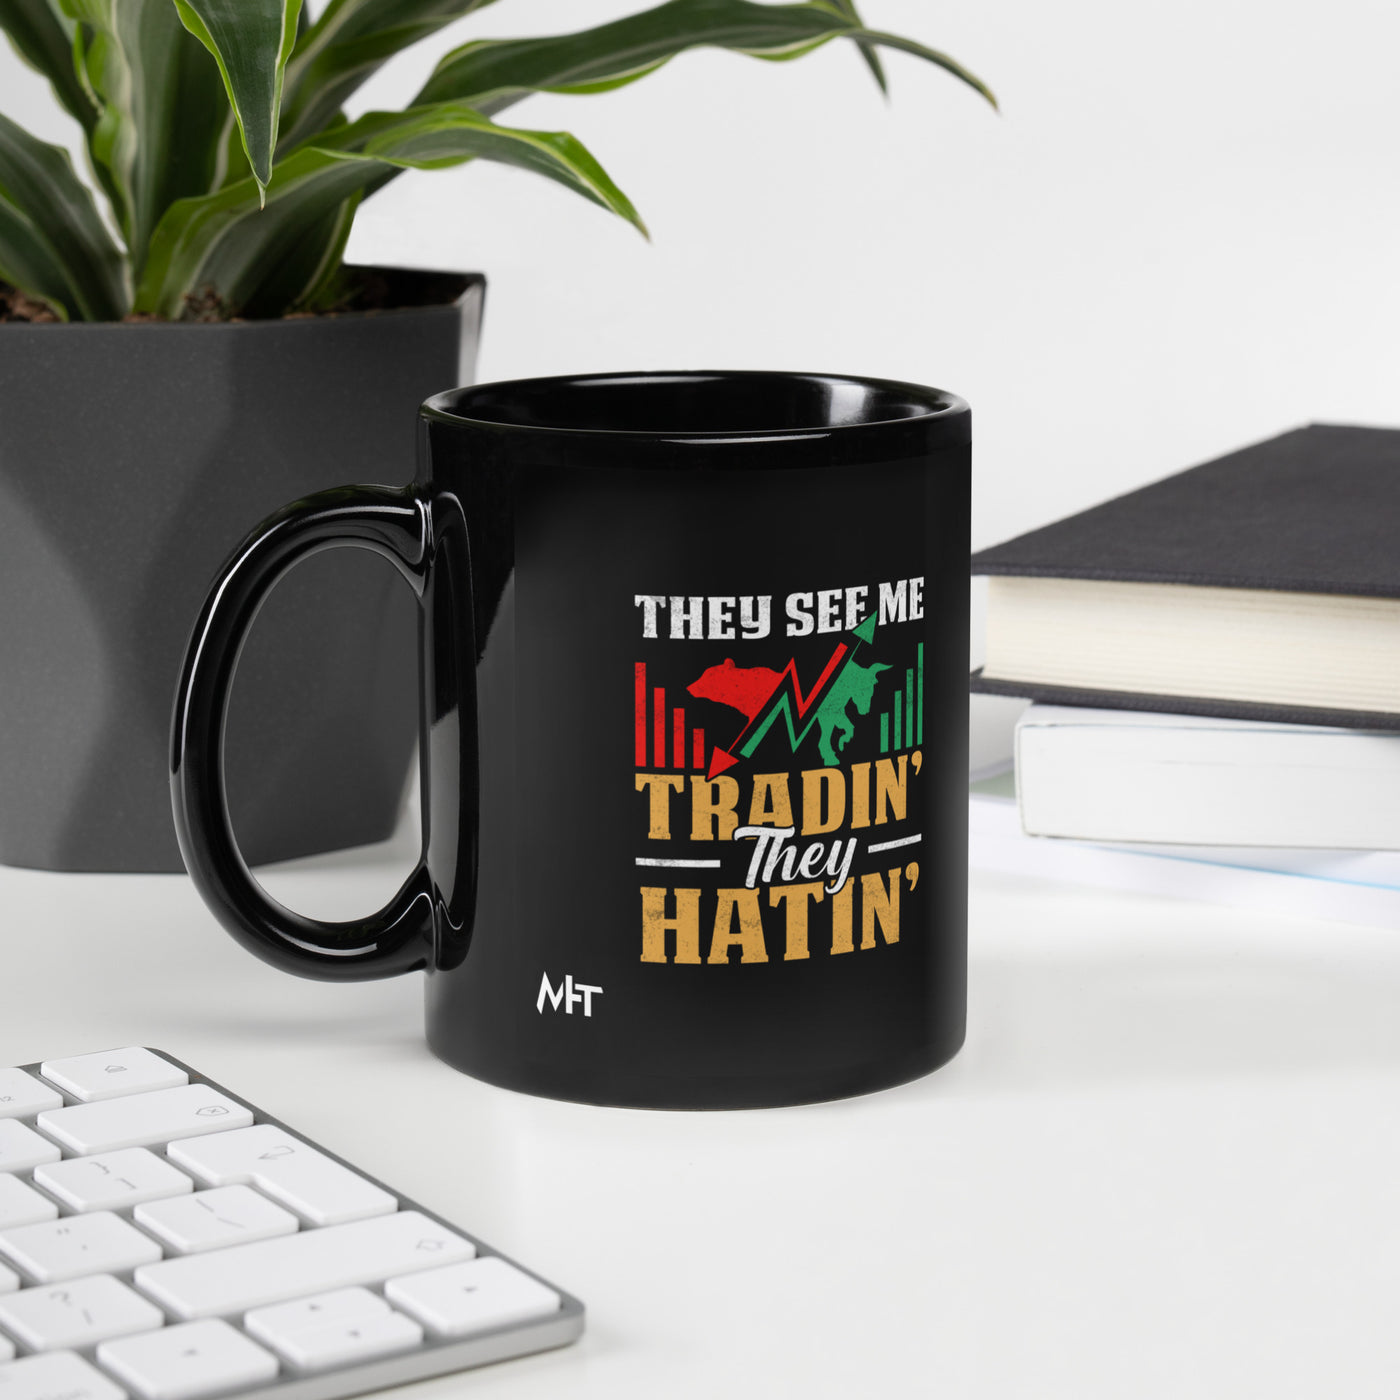 They See me Trading, they Hating - Black Glossy Mug